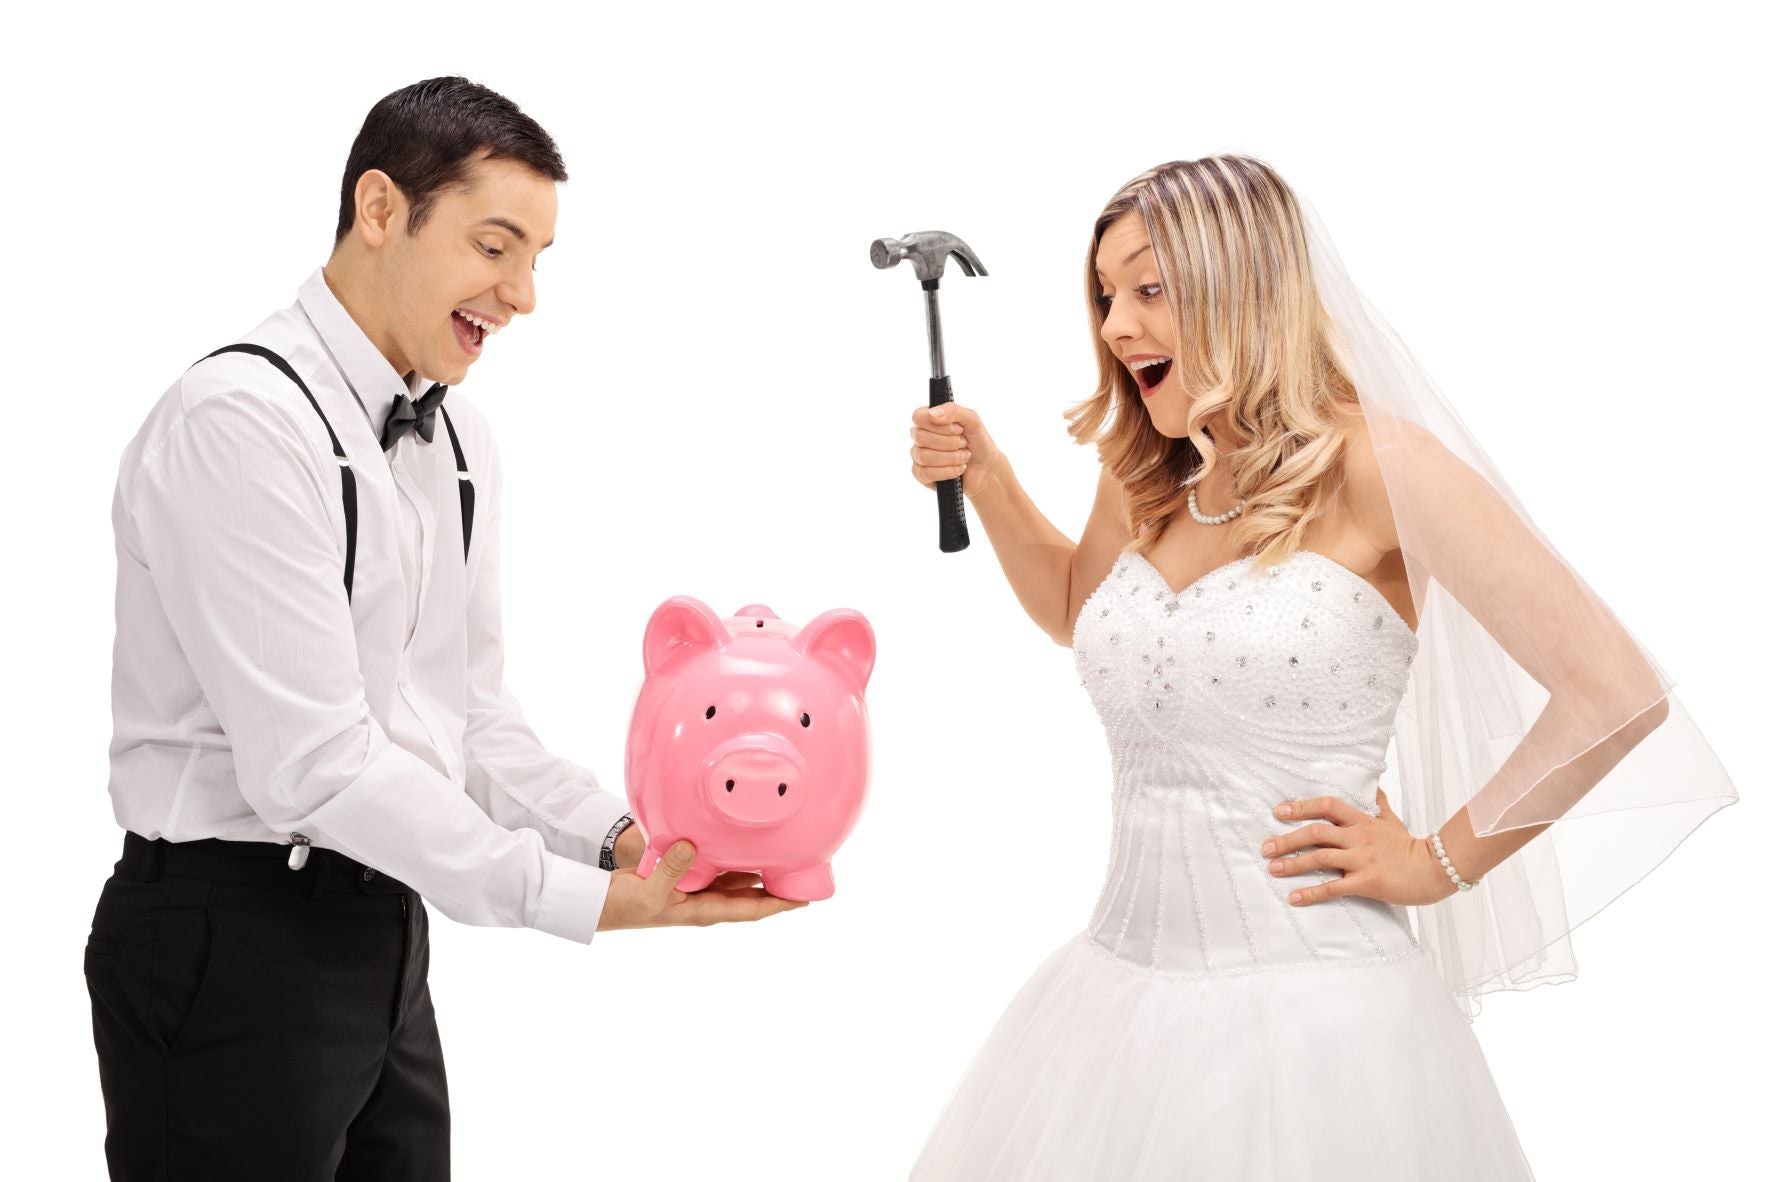 Be Smart When Planning Your Wedding - Ways to Save Money